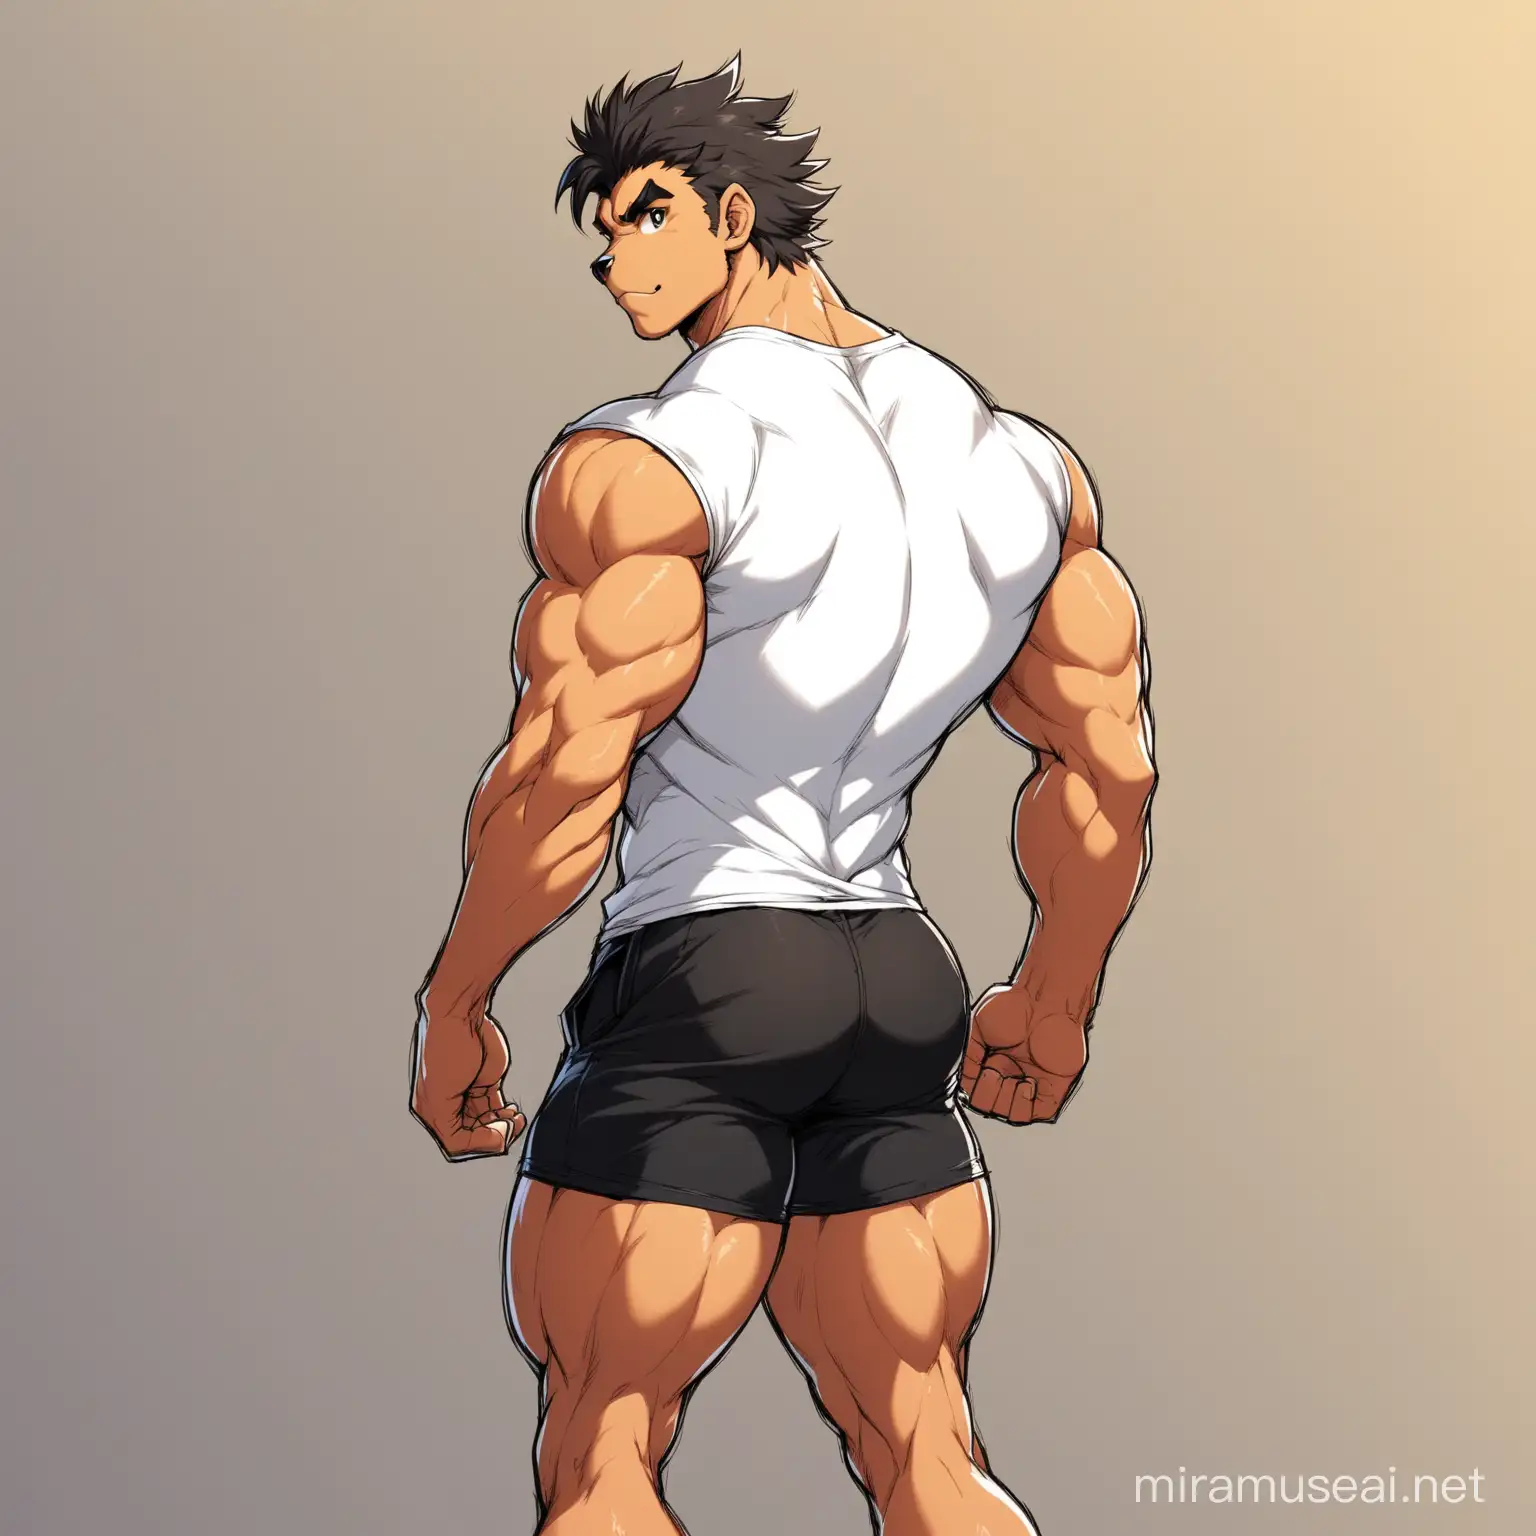 Muscular Man in White TShirt and Black Shorts Standing Strong